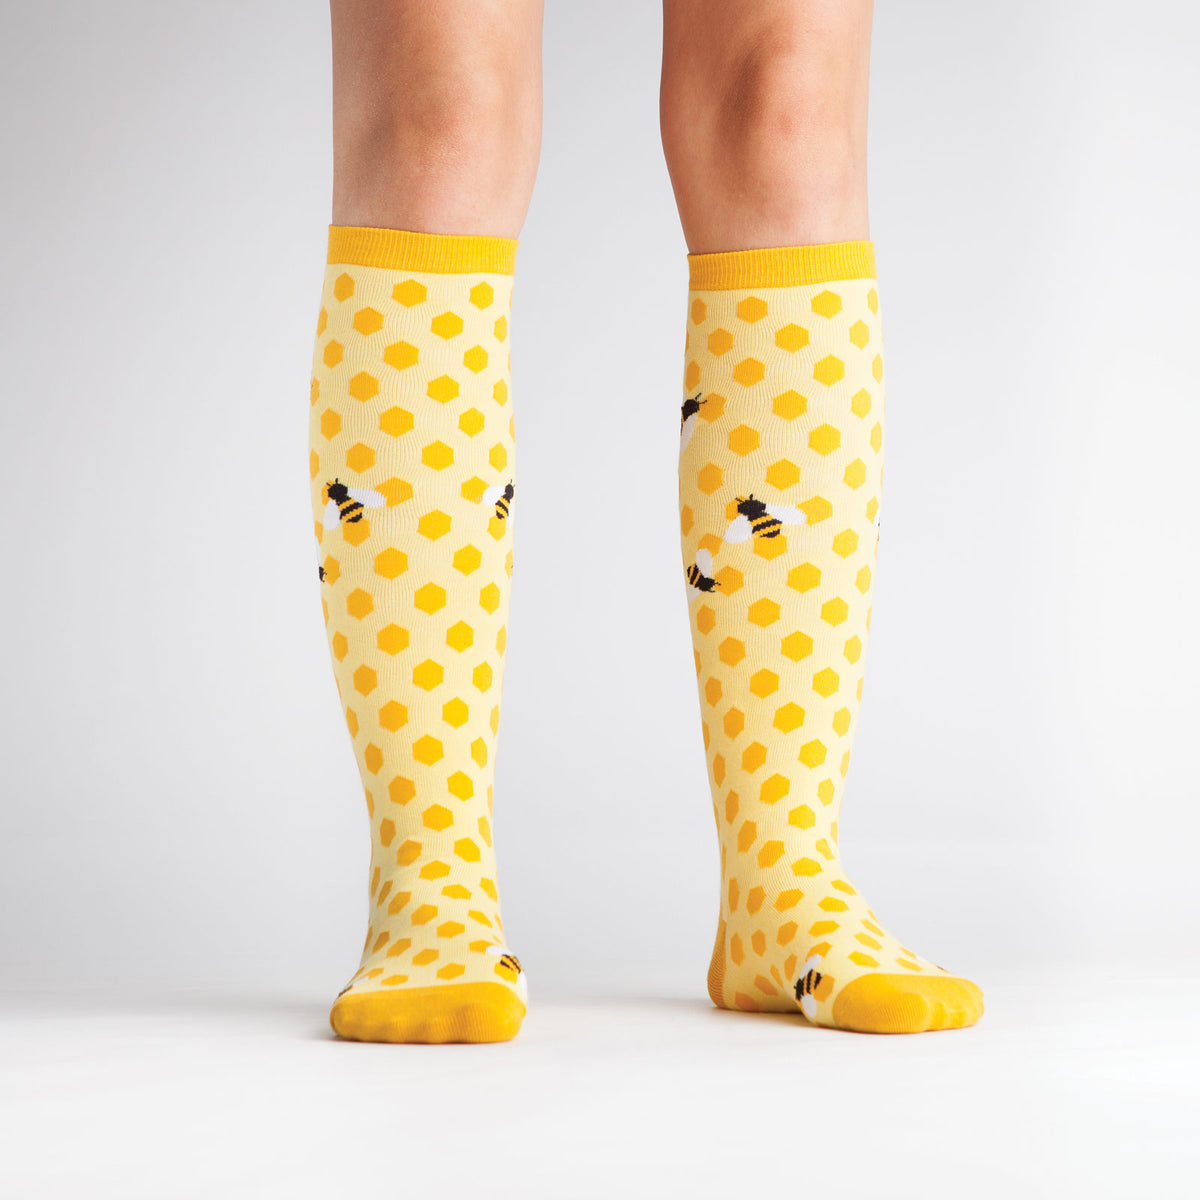 Sock It To Me women&#39;s knee high sock Bees KneesSock It To Me women&#39;s yellow knee high sock Bees Knees featuring honeycomb and bees all over on model from front